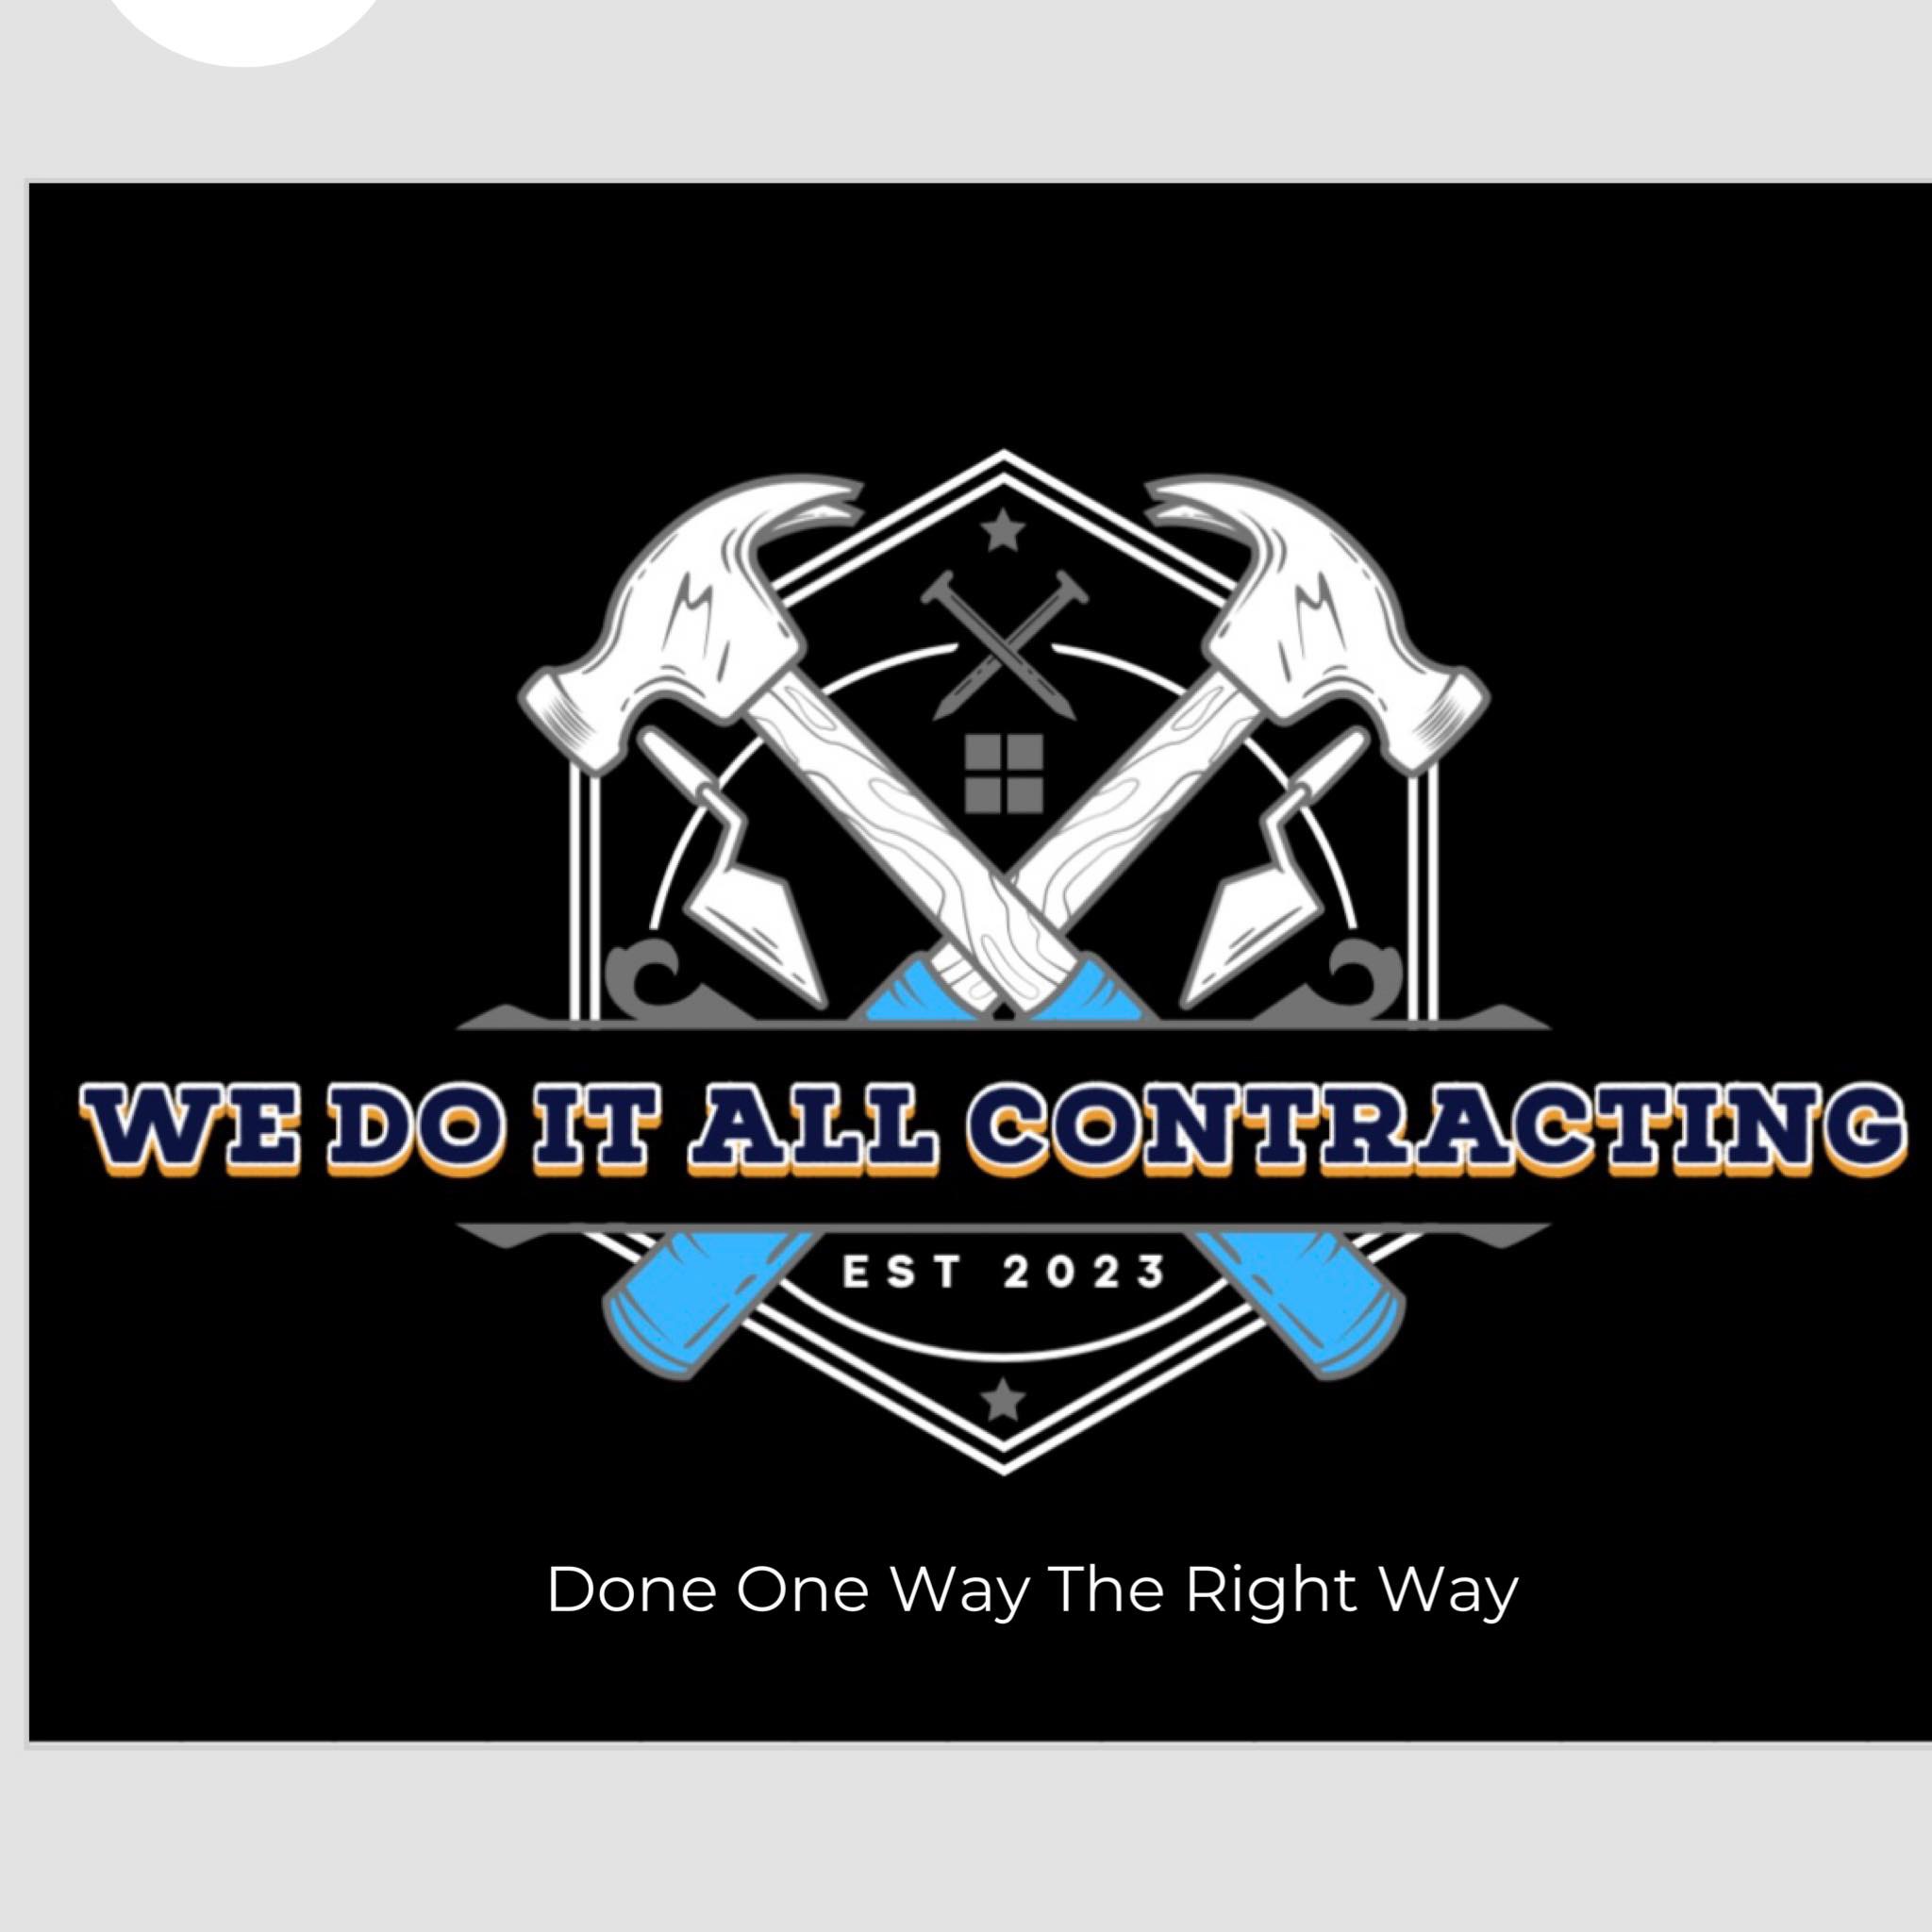 We Do It All Contracting 's logo